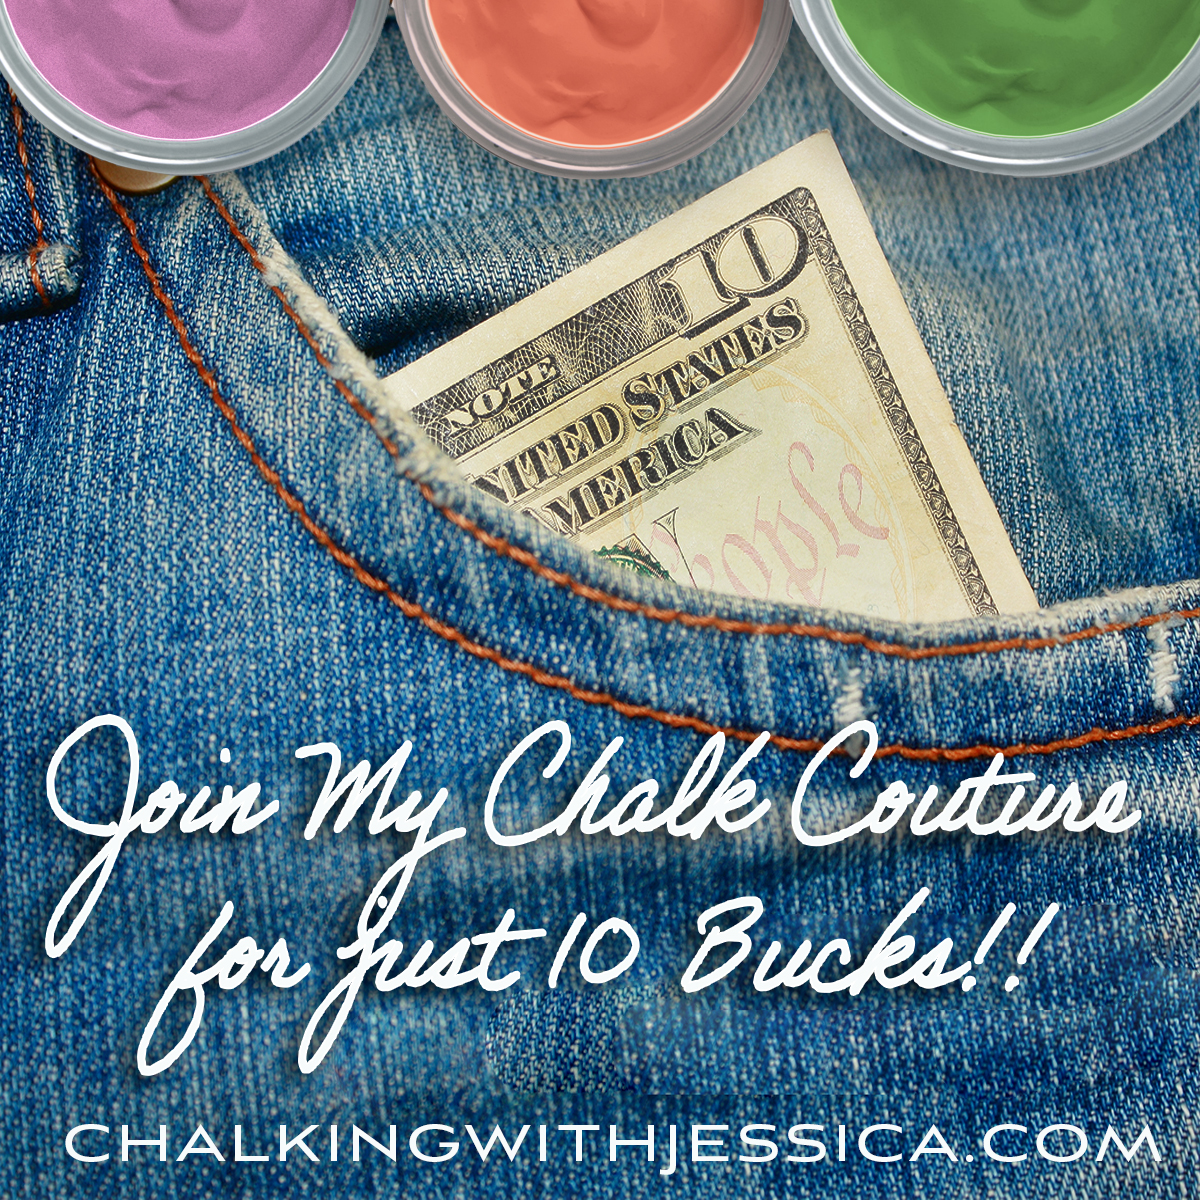 Aww Shucks, It’s Just Ten Bucks. Join my Chalk Couture with the Best Deal Ever!